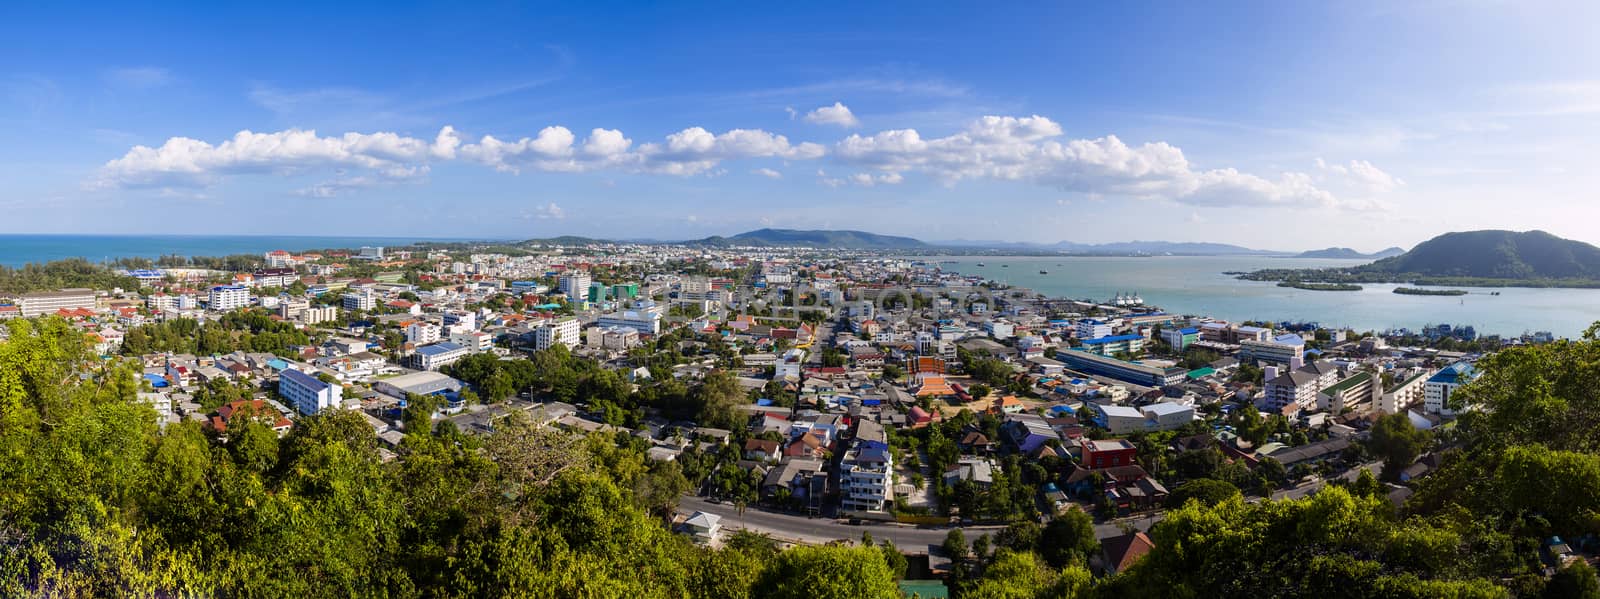 View of Songkhla by jee1999